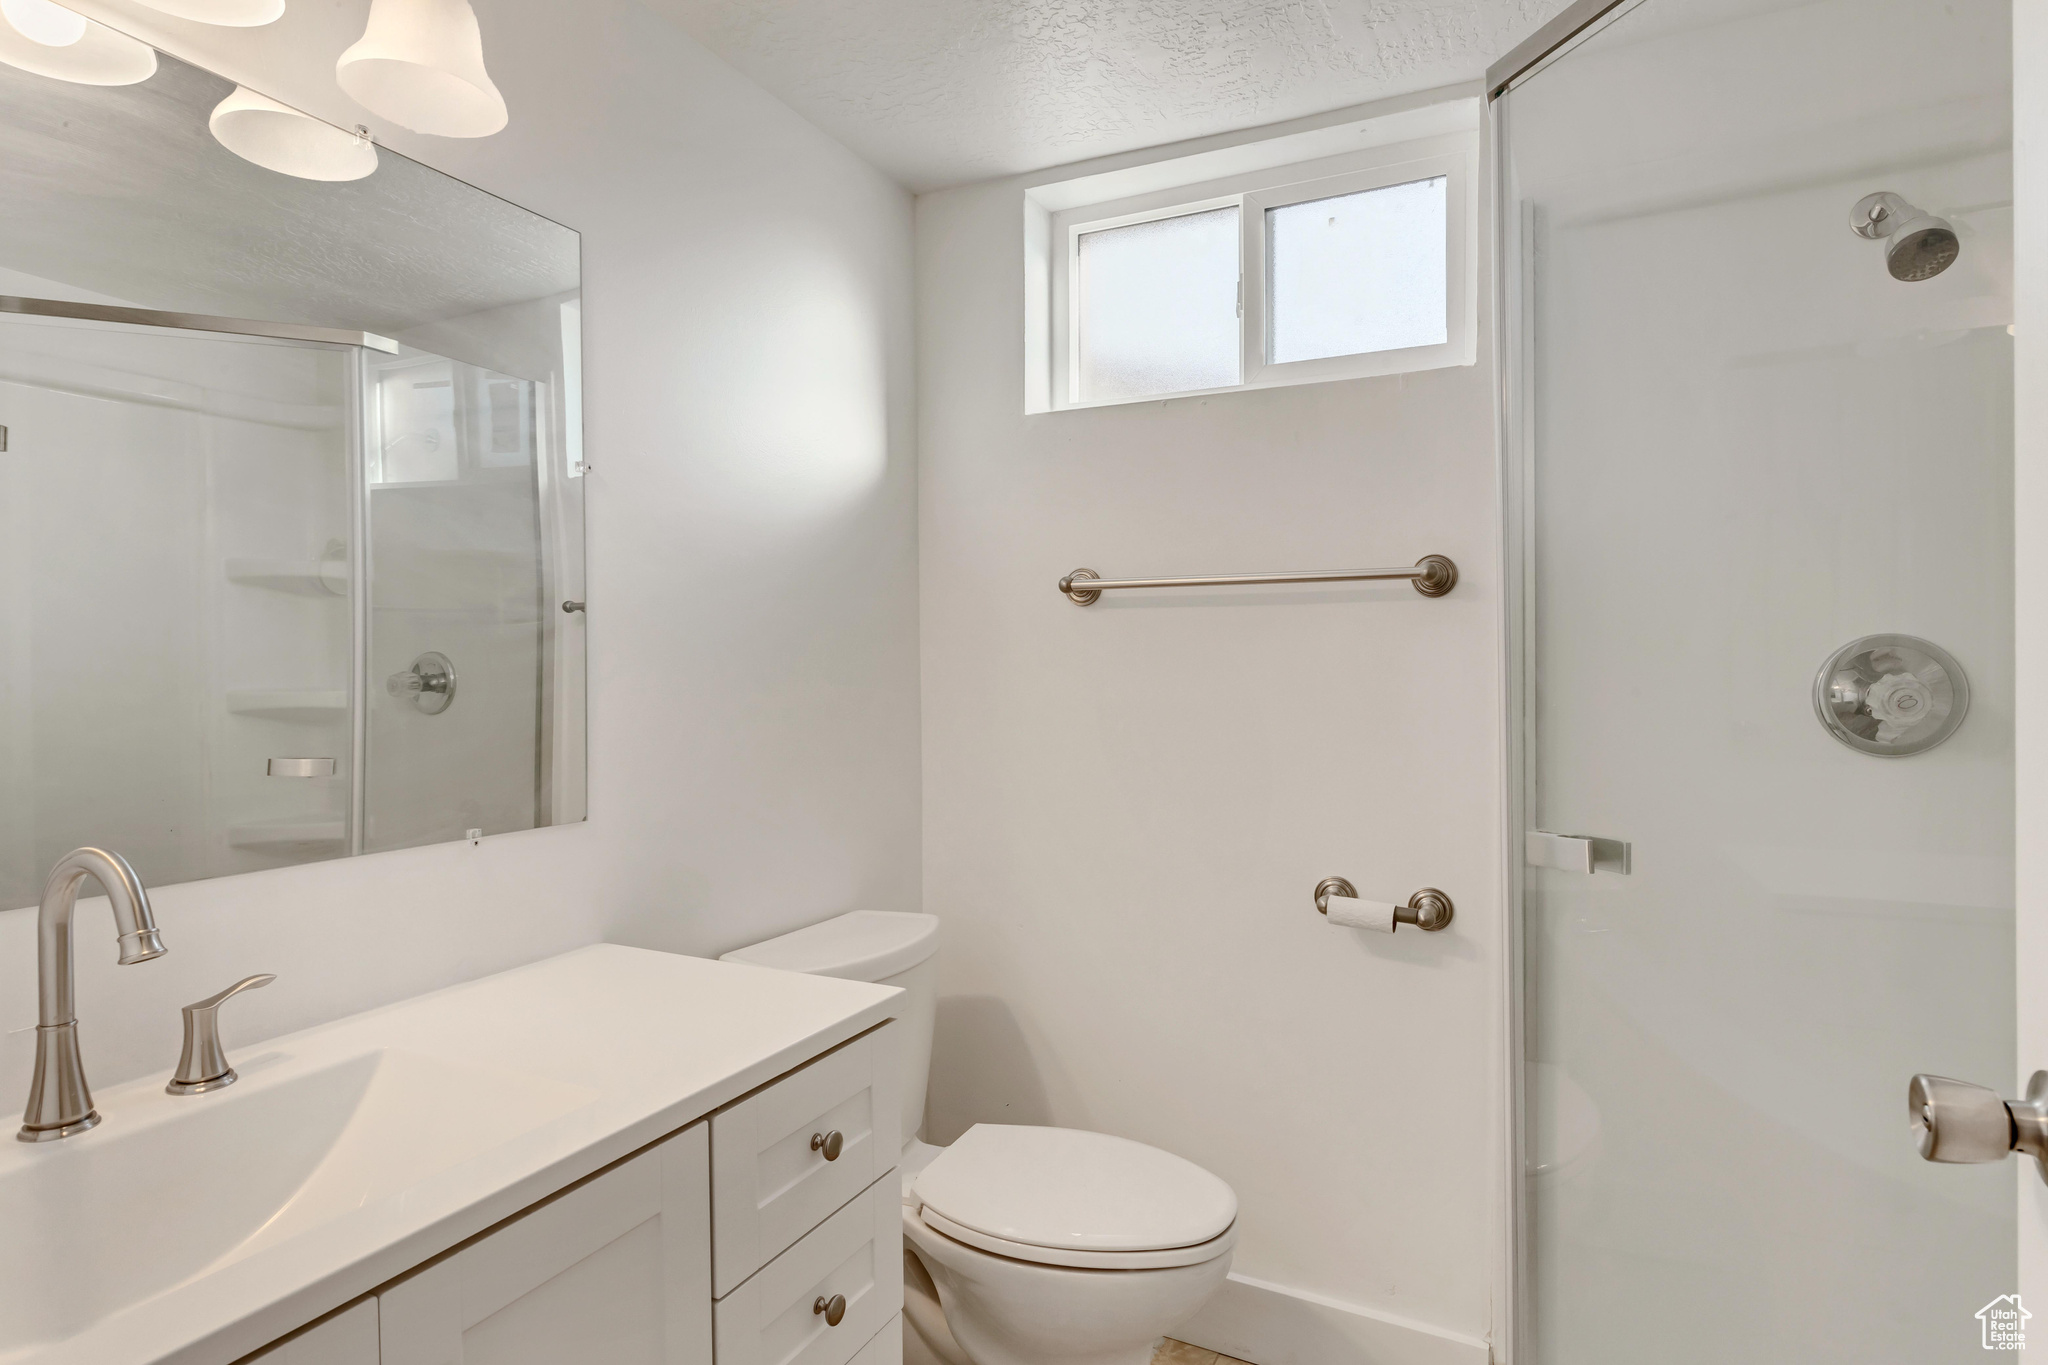 Bathroom with vanity, toilet, a shower with door, and a textured ceiling